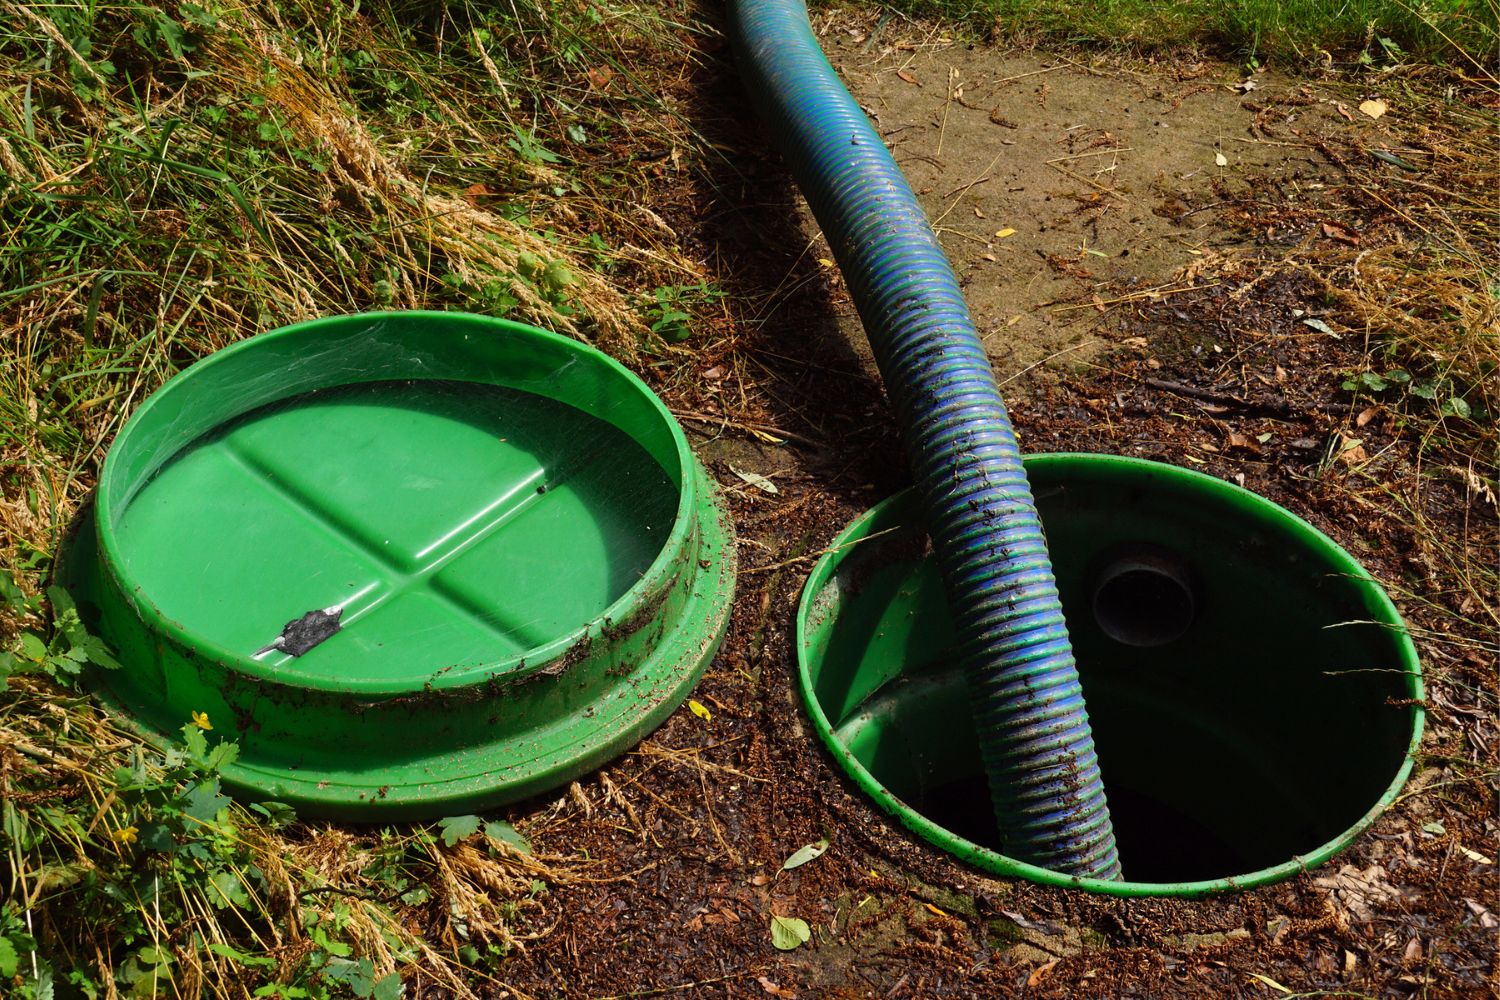 Do Septic Tanks Drain Into The Ground?